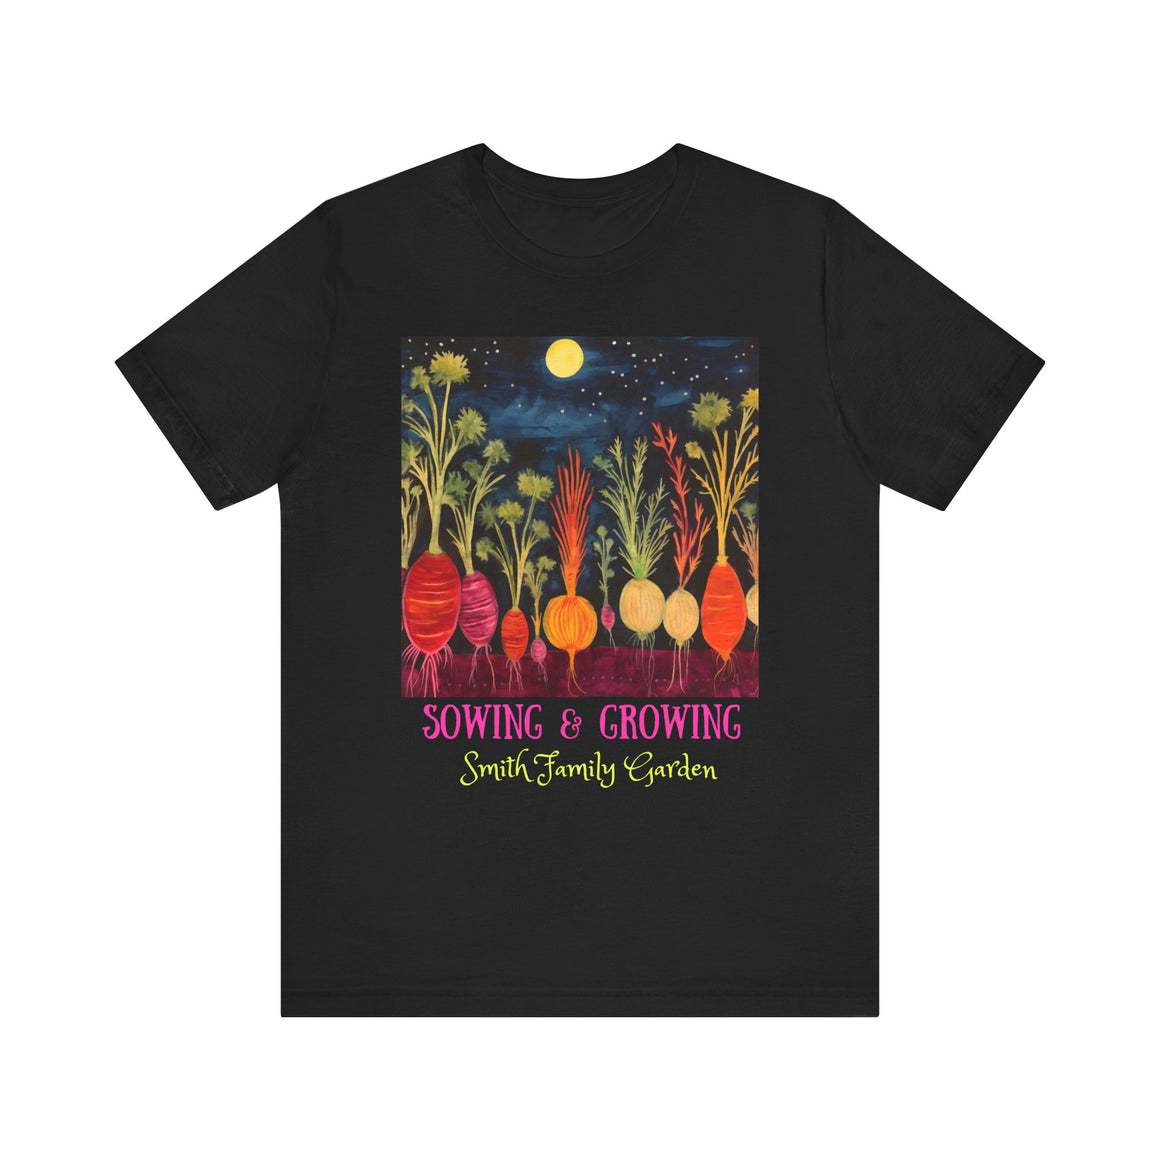 Sowing & Growing - Personalization option - Unisex Jersey Short Sleeve Tee